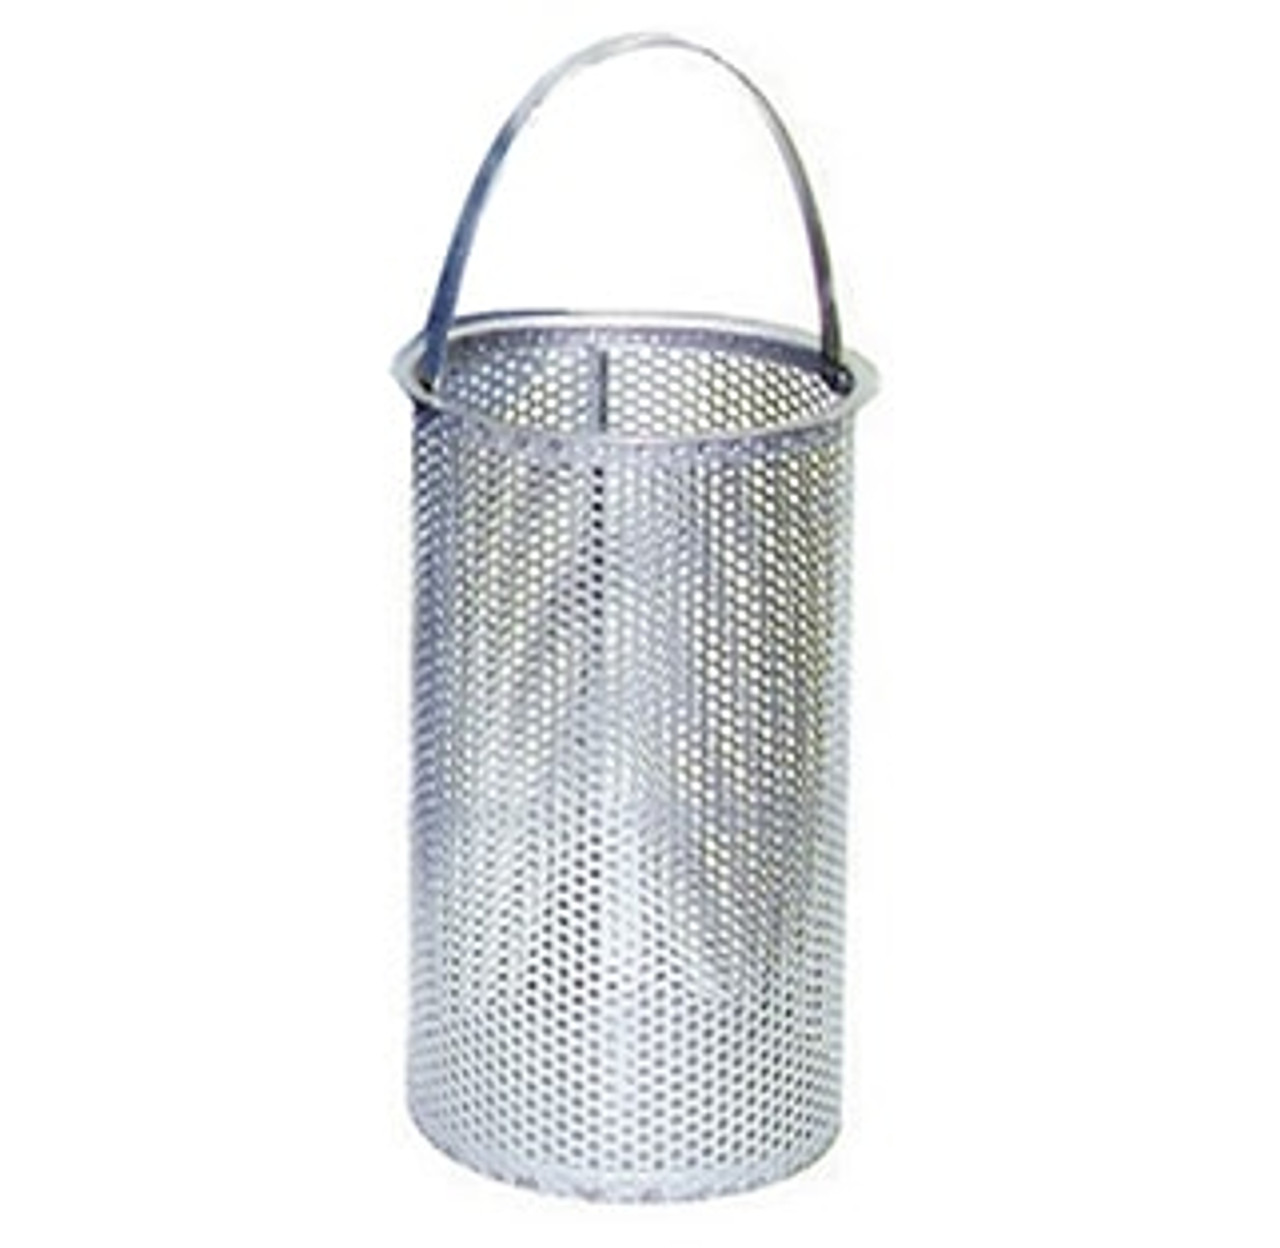 100 Mesh and 5/32" Perforation Replacement Basket for 8" Eaton Model 30R Strainer